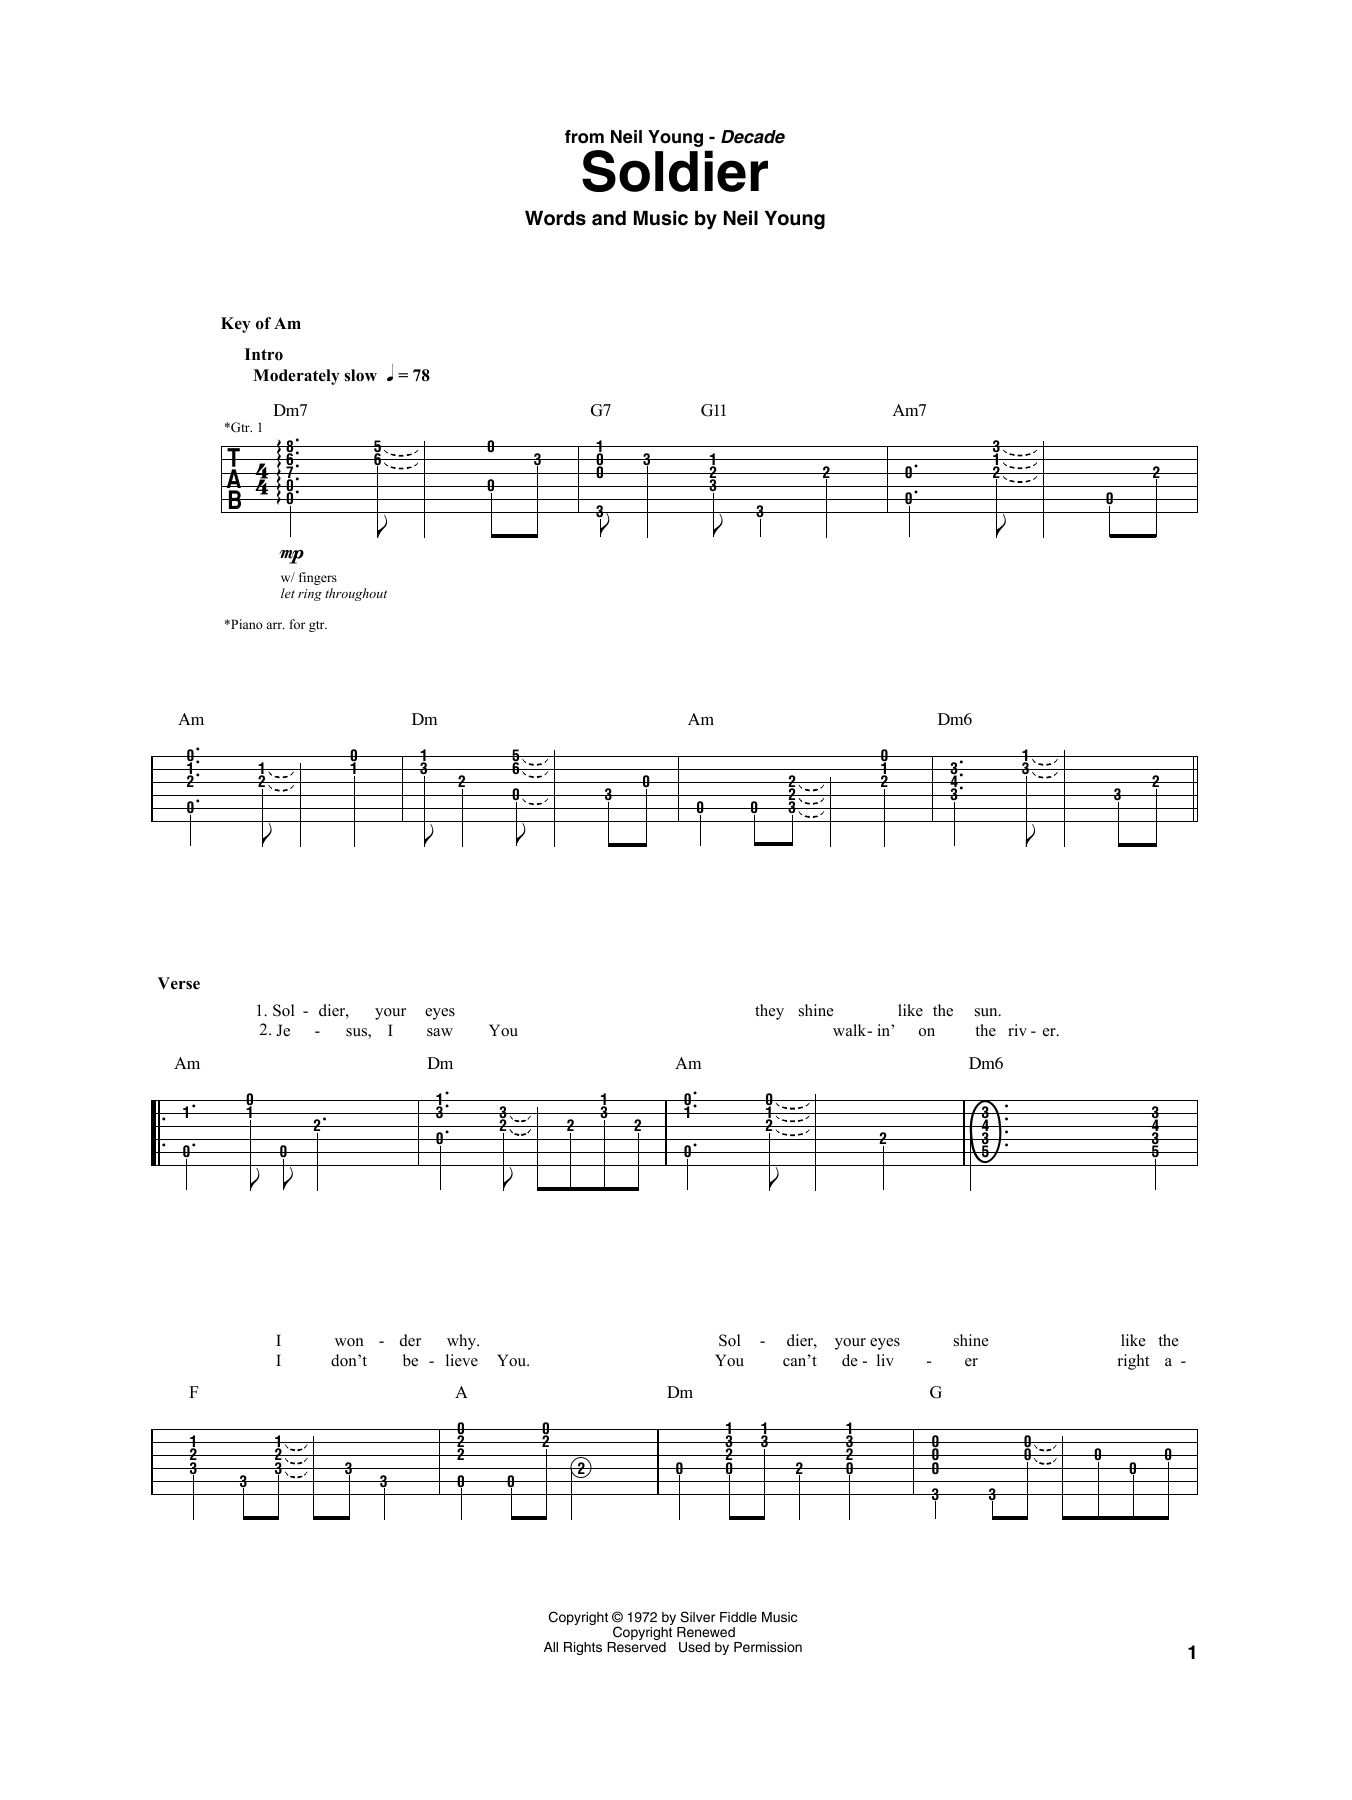 Download Neil Young Soldier Sheet Music